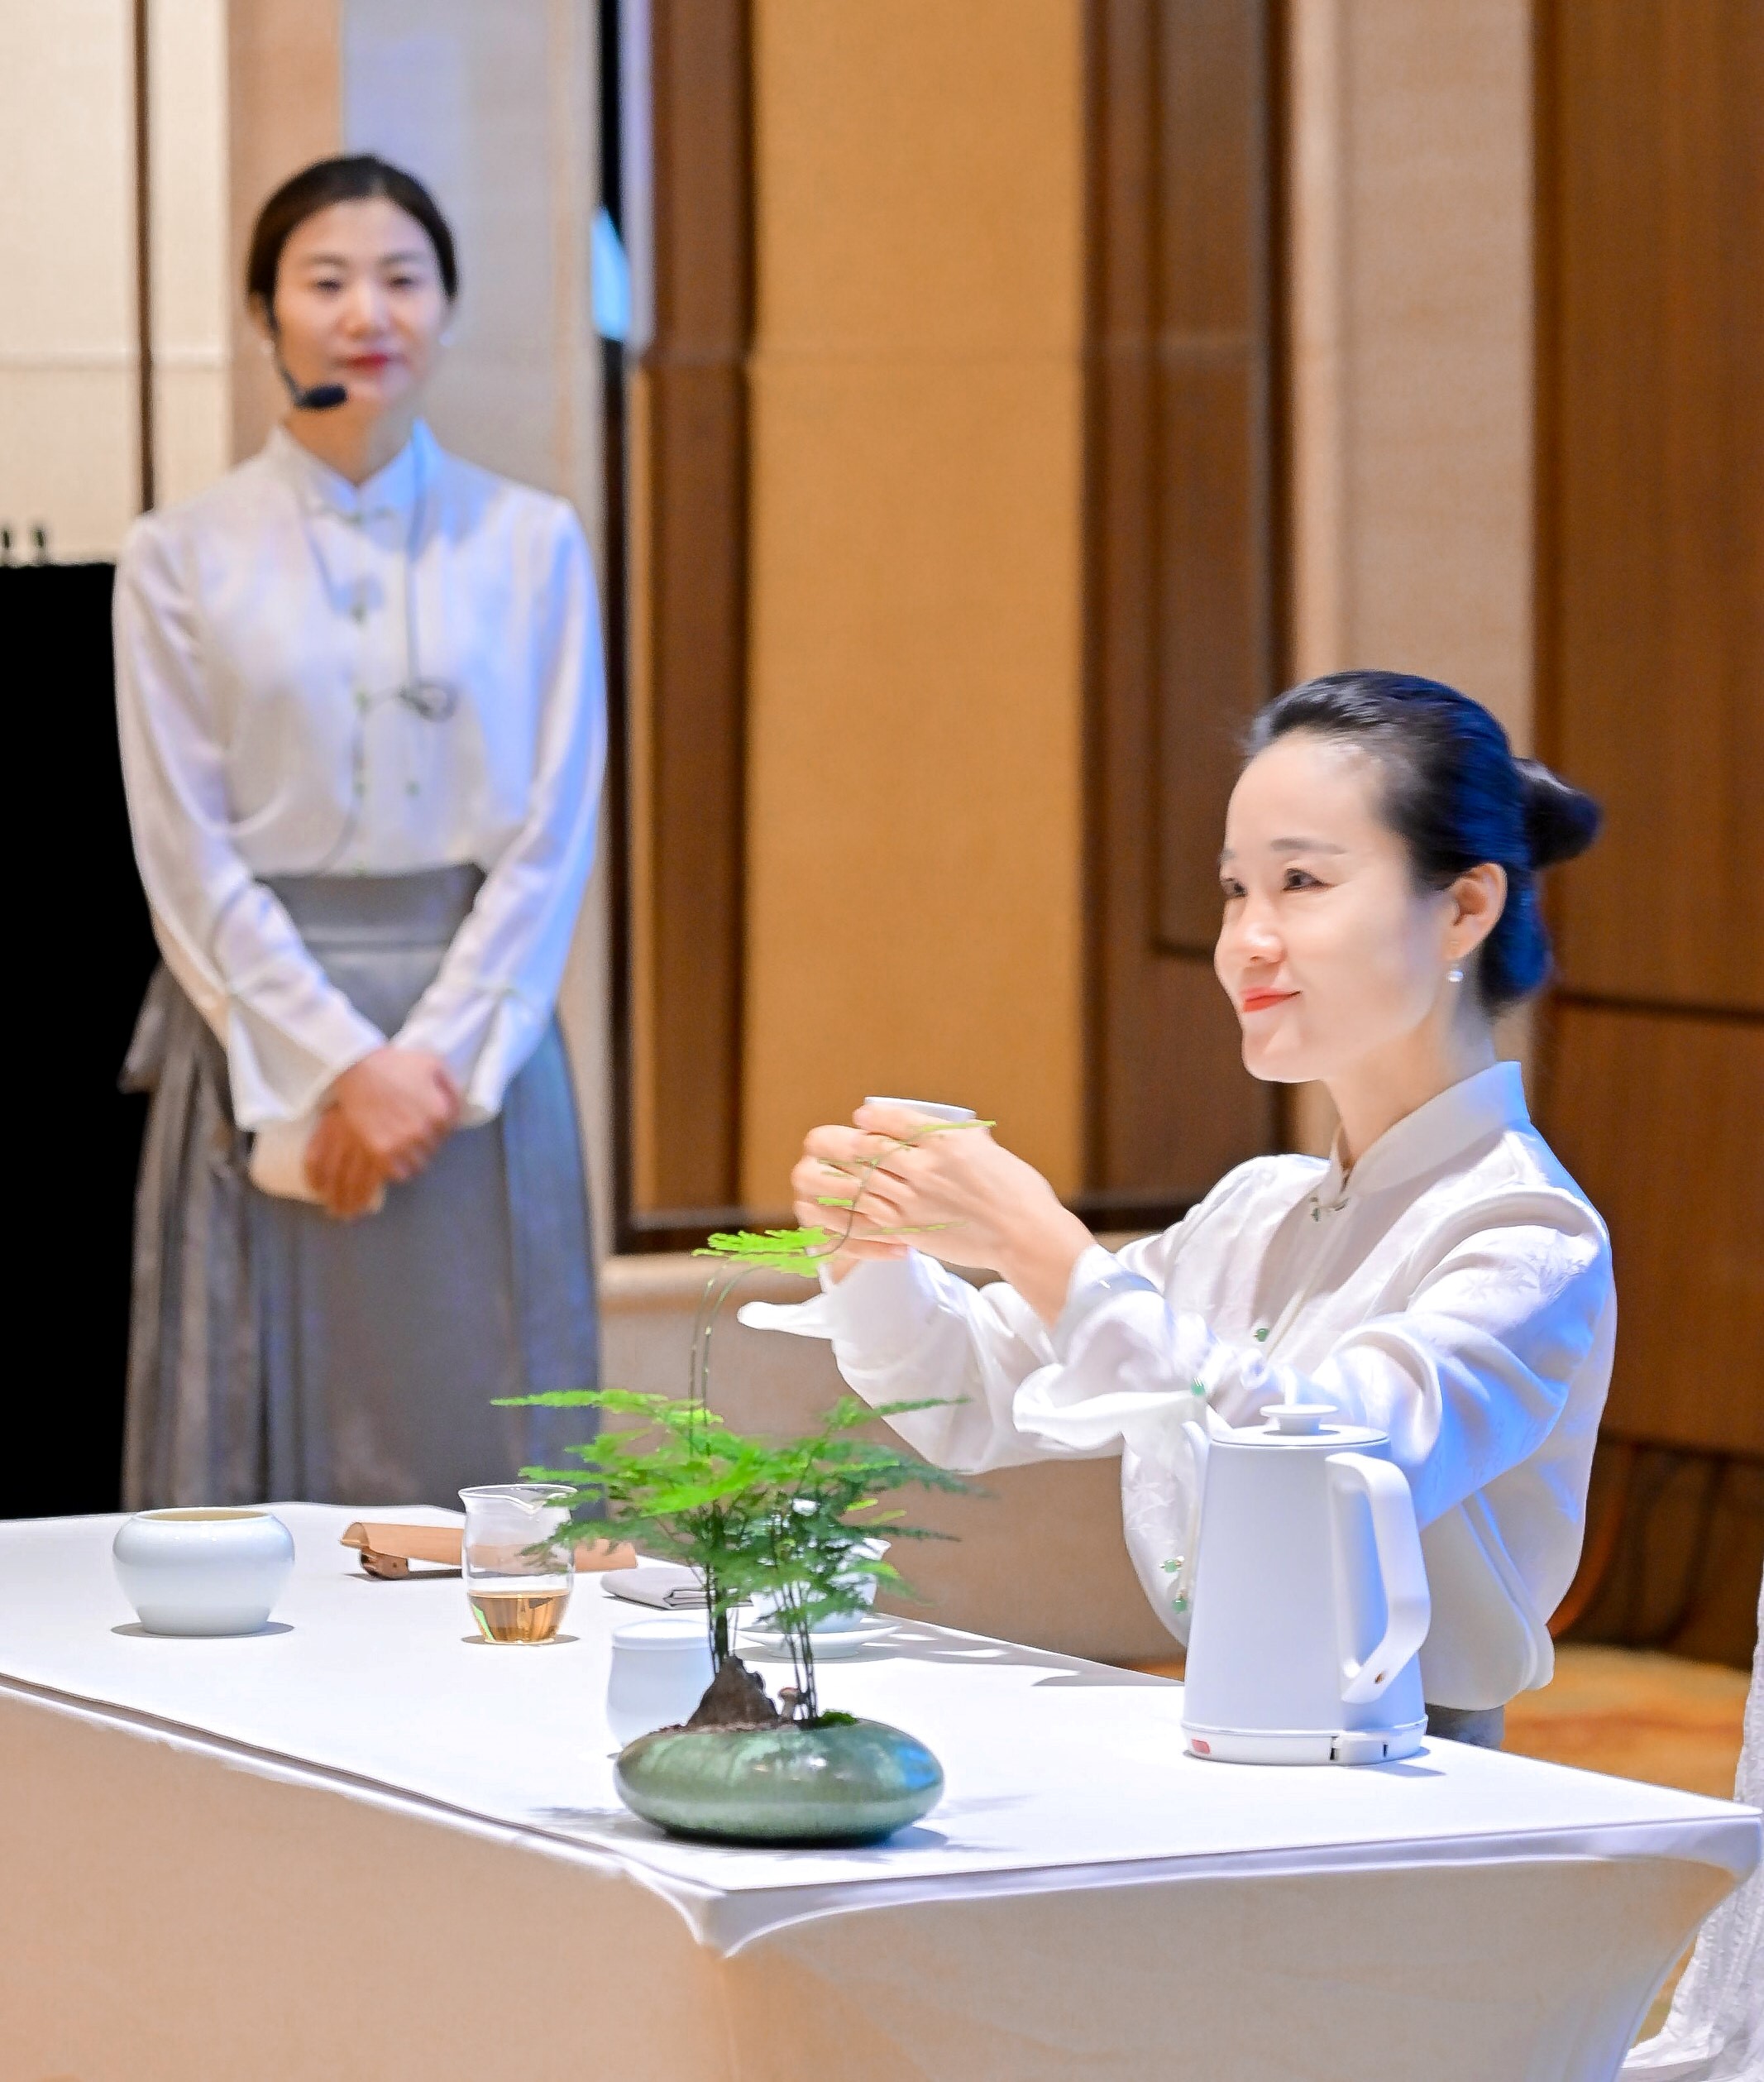 The tea ceremony with Ancient Chinese Qin-Xiao music that explored the traditional art of wellness through Chinese music and tea rituals.